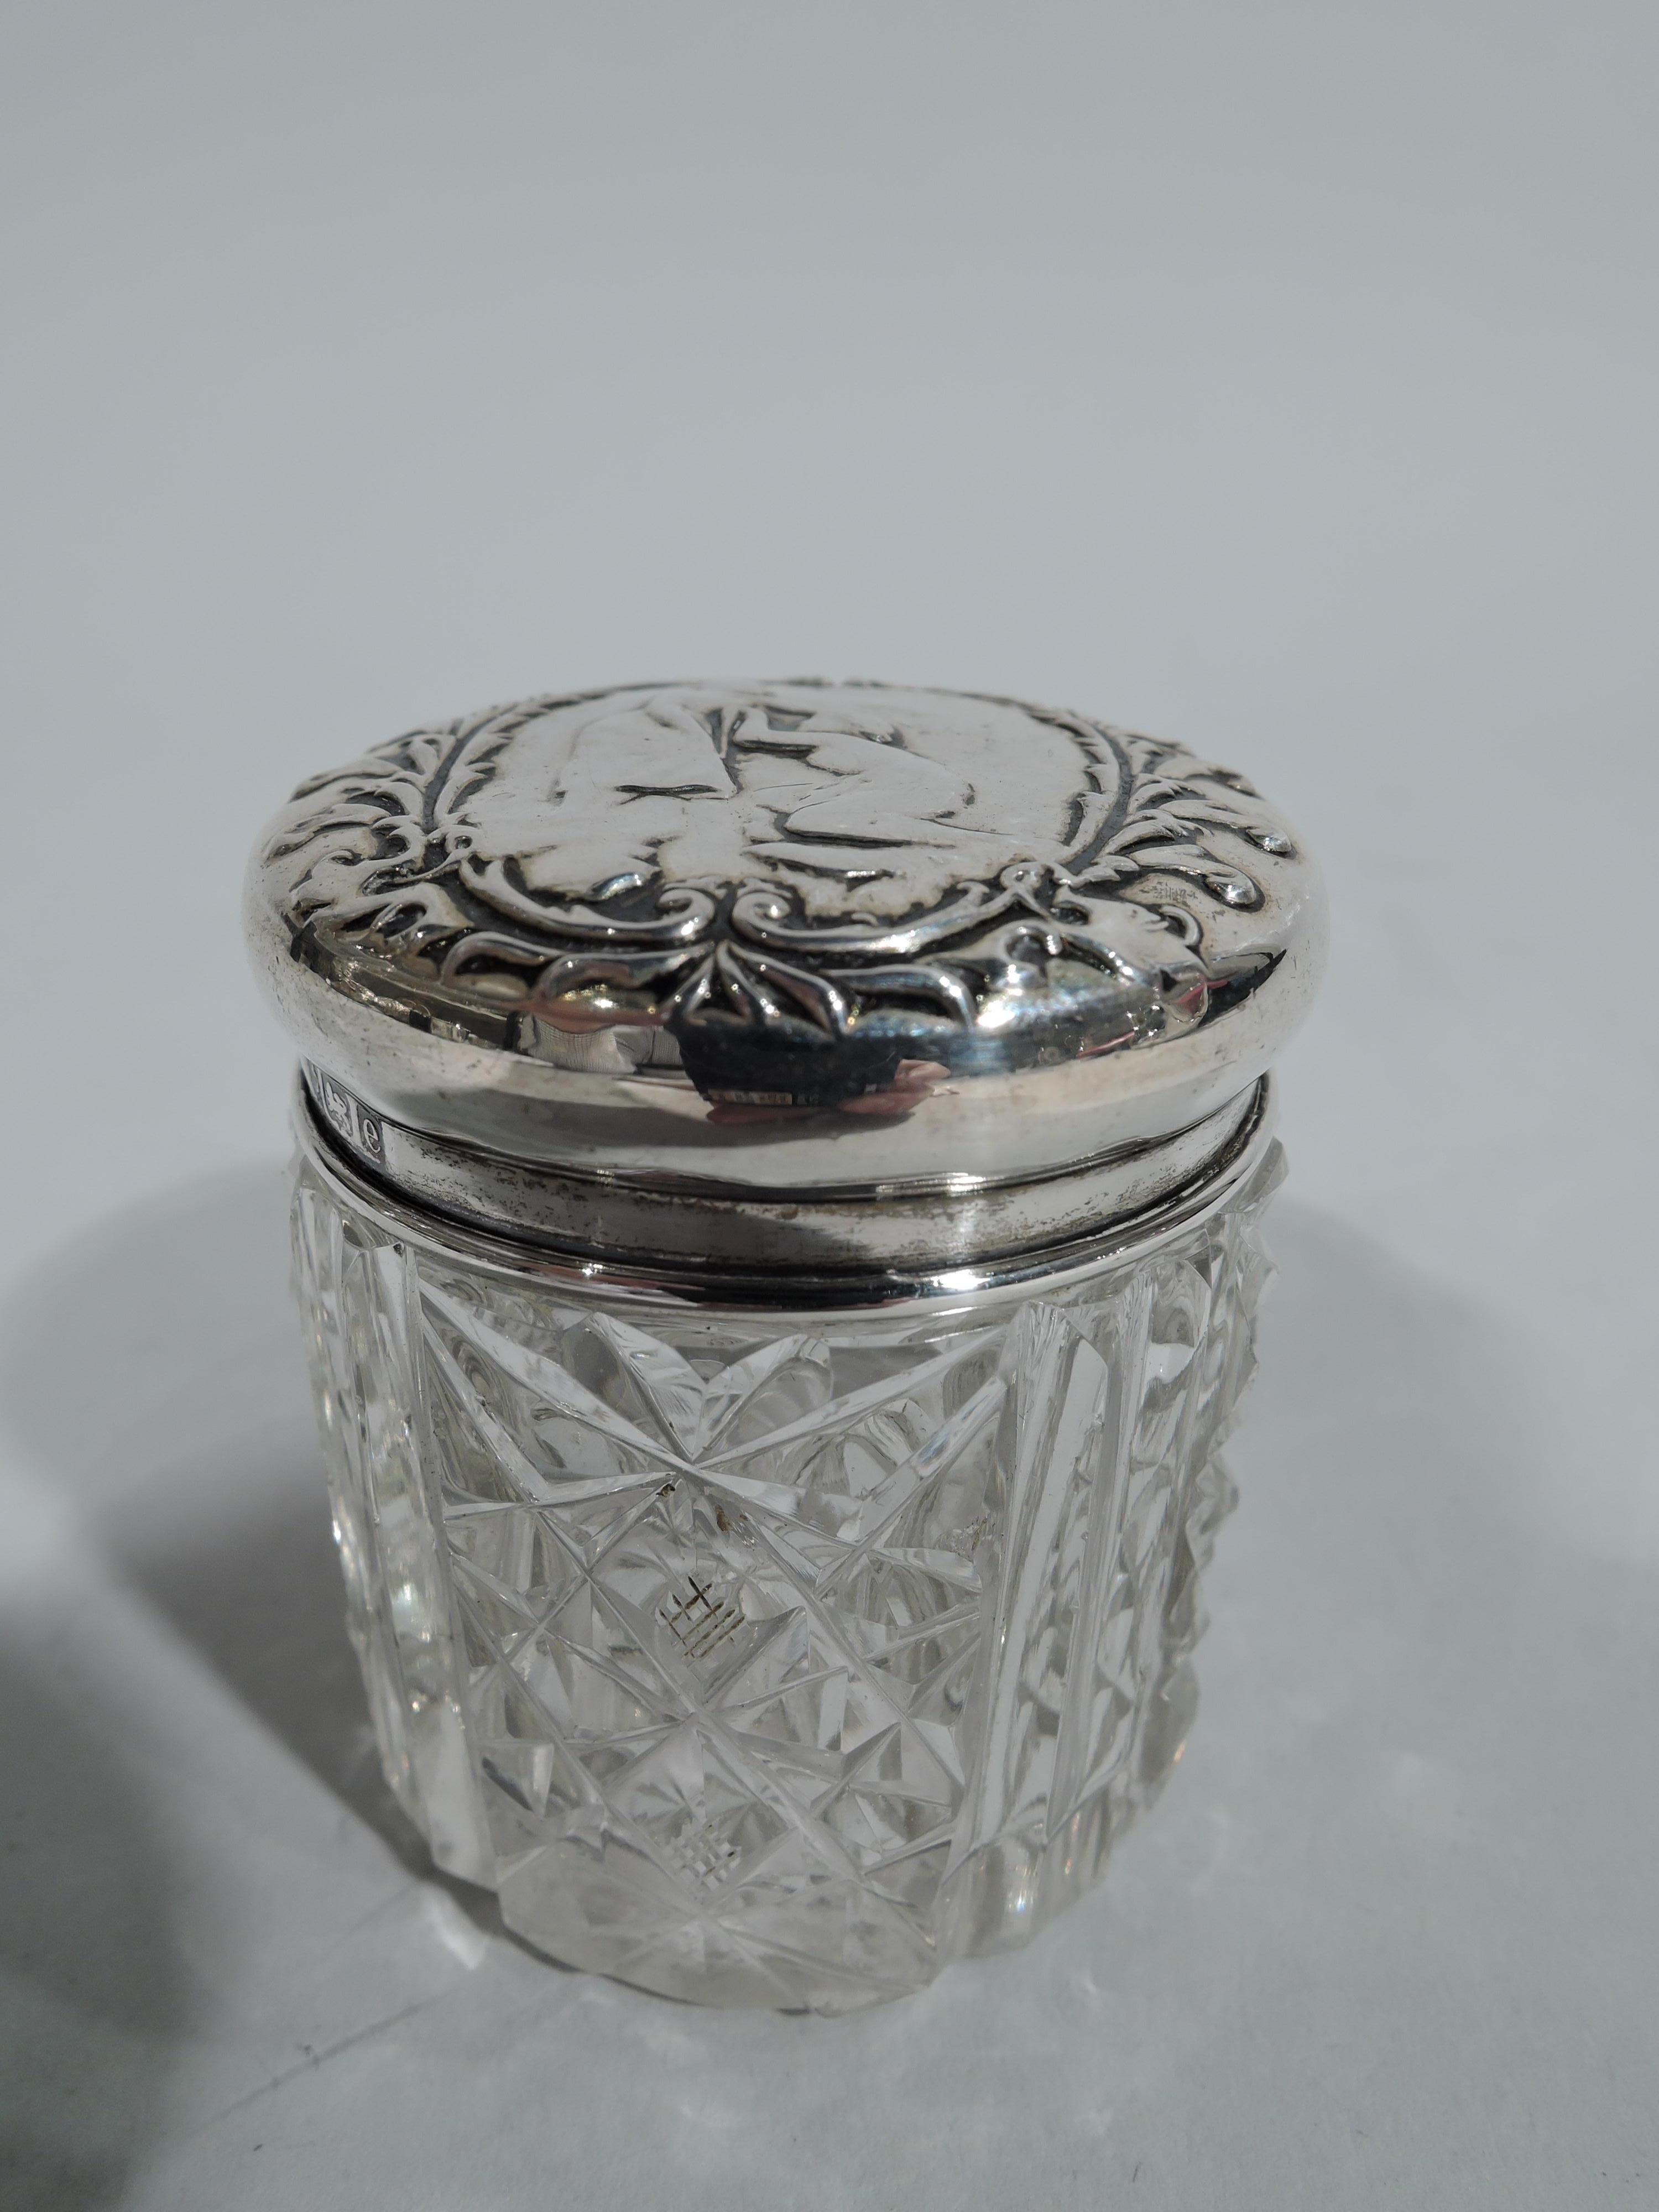 Edwardian cut-glass powder jar with sterling silver cover. Made by Adie Bros in Birmingham in 1904. Drum form with diaper ornament alternating with double flutes. On cover are two figures of which one kneeling in leafy scroll wreath. Cover fully